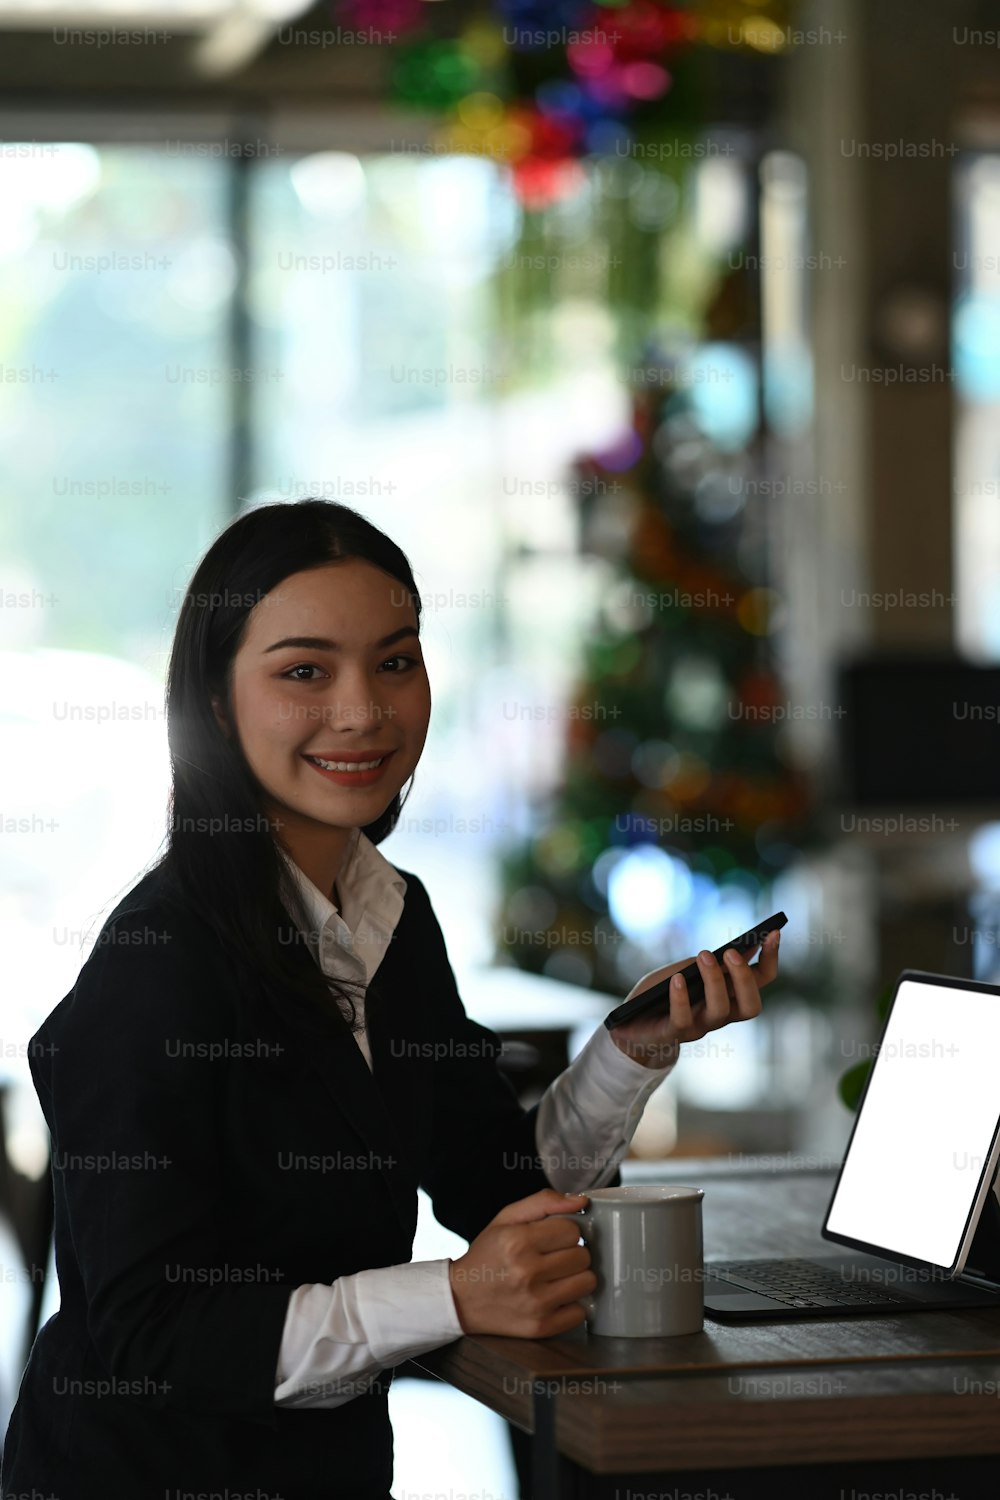 Portrait of smiling businesswoman sitting at her workplace holding smart phone and smiling to camera.